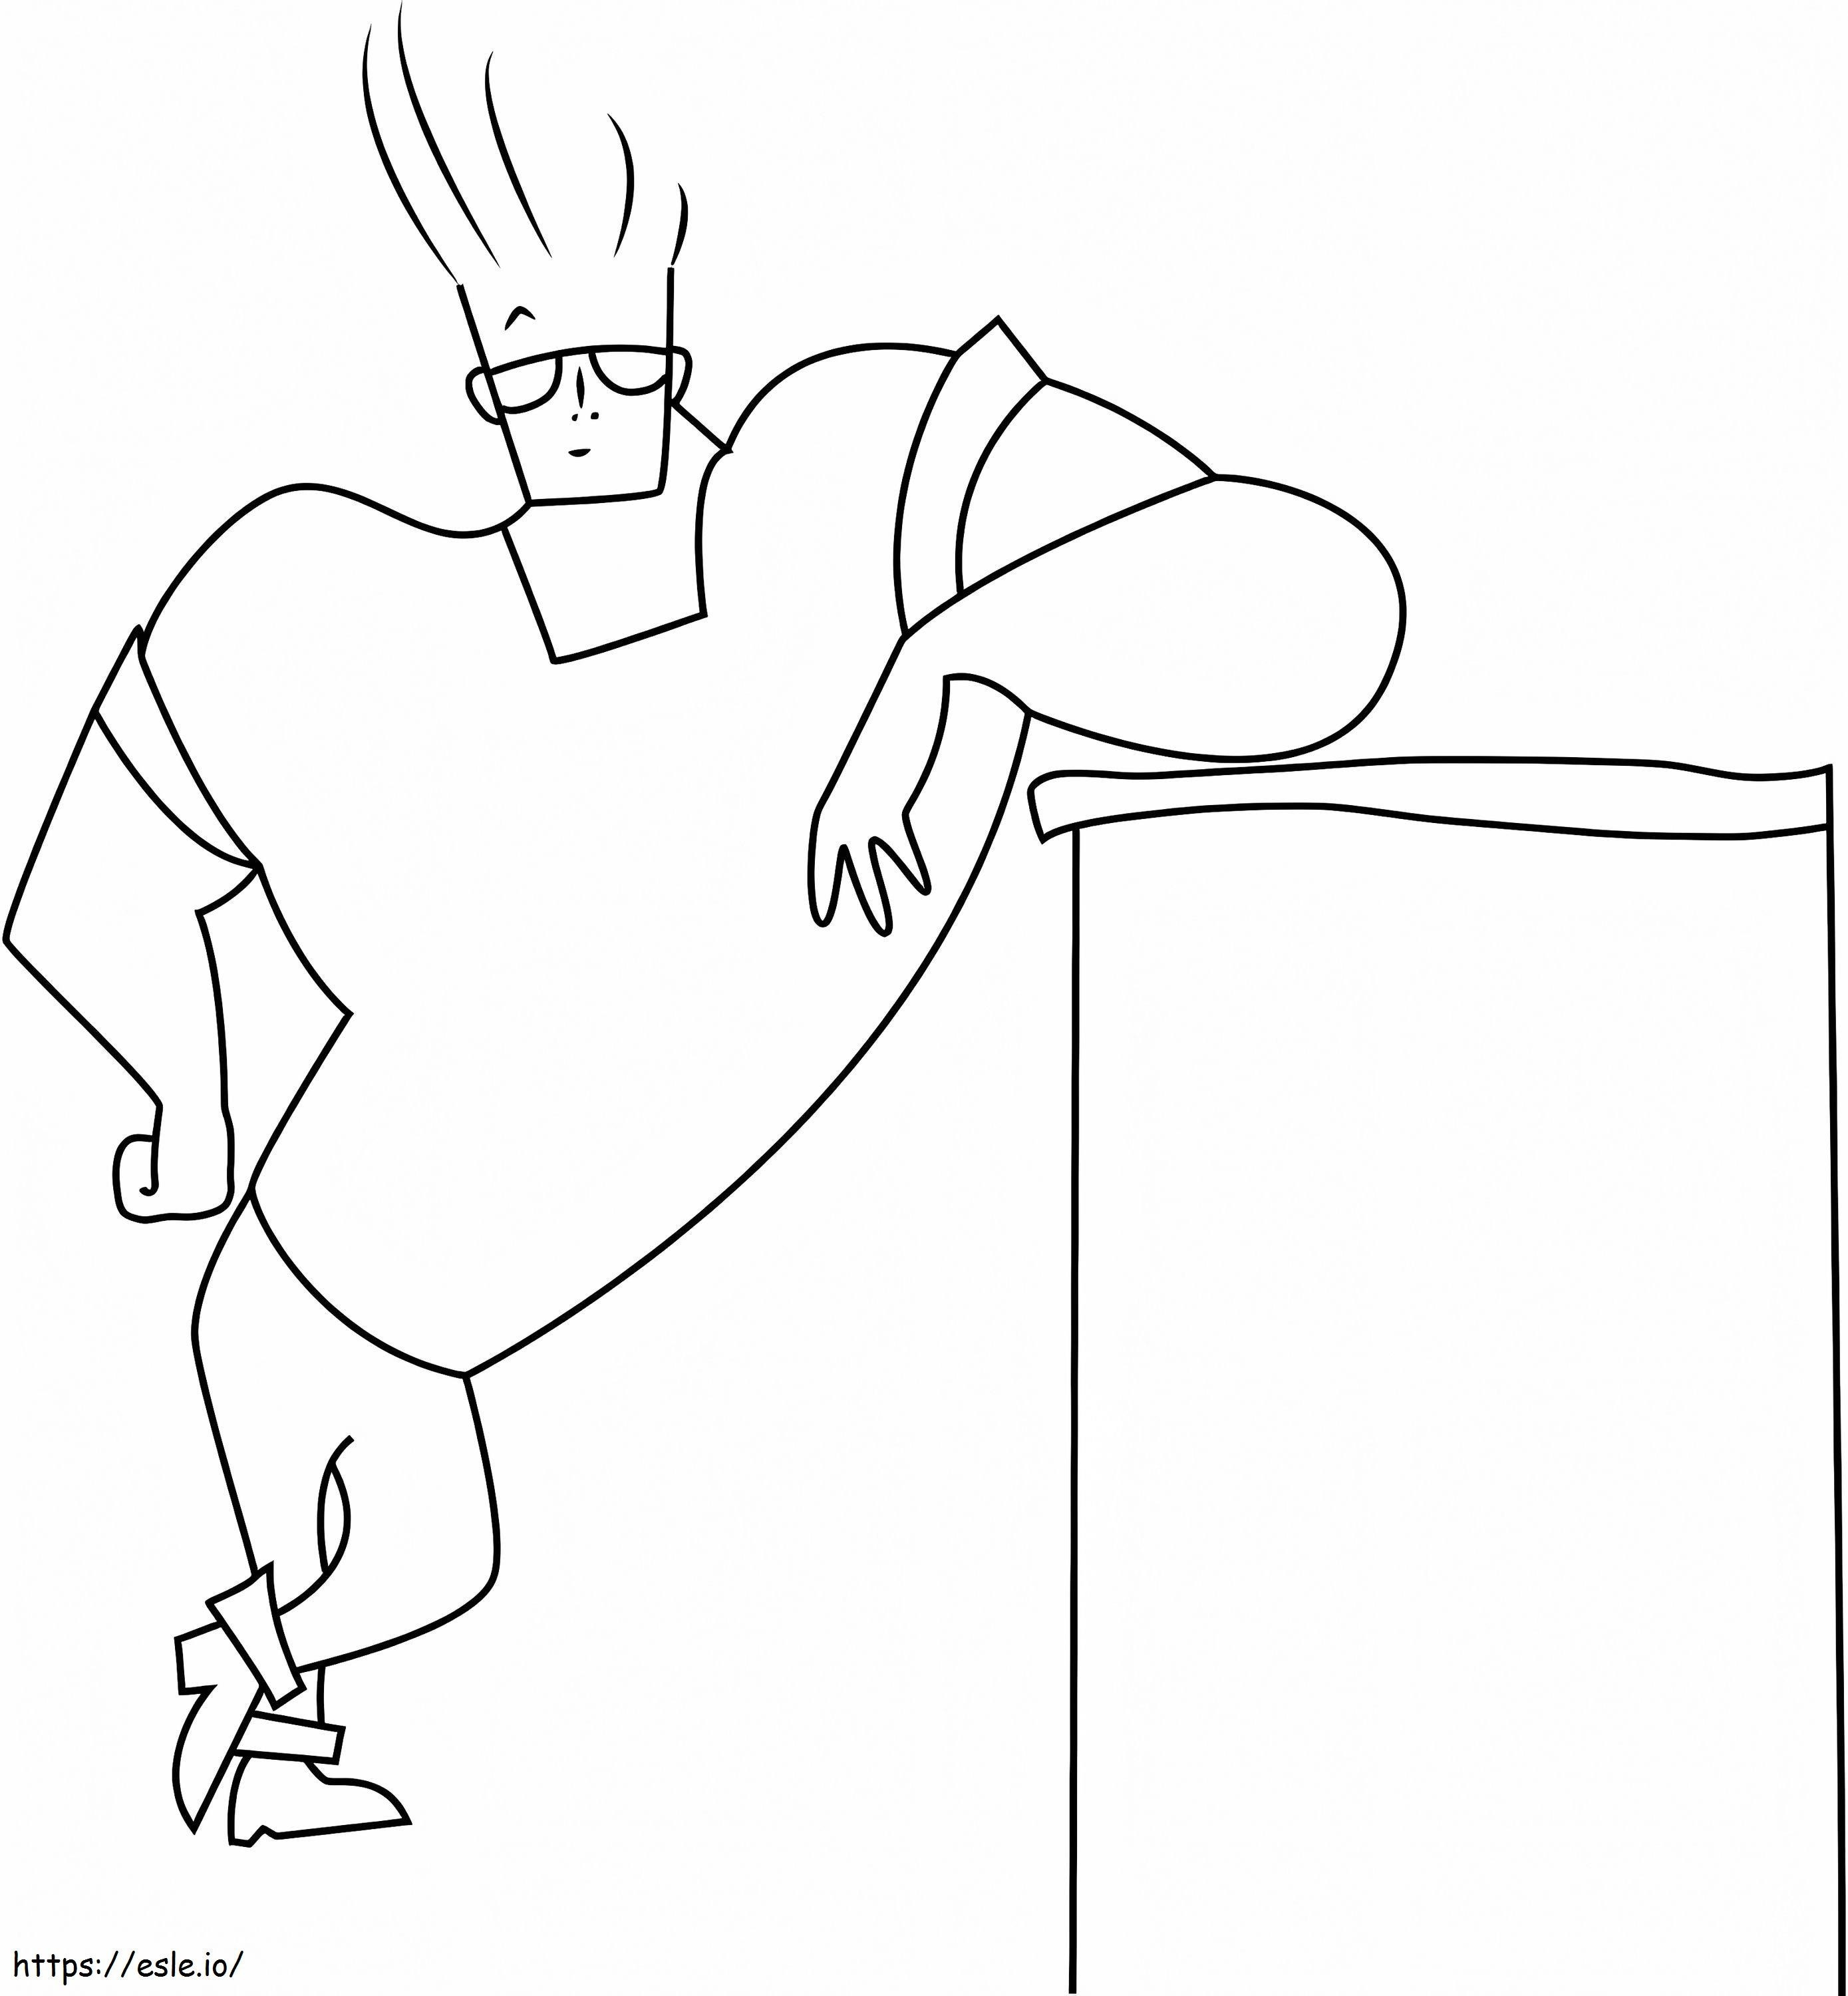 Awesome Johnny Bravo coloring page